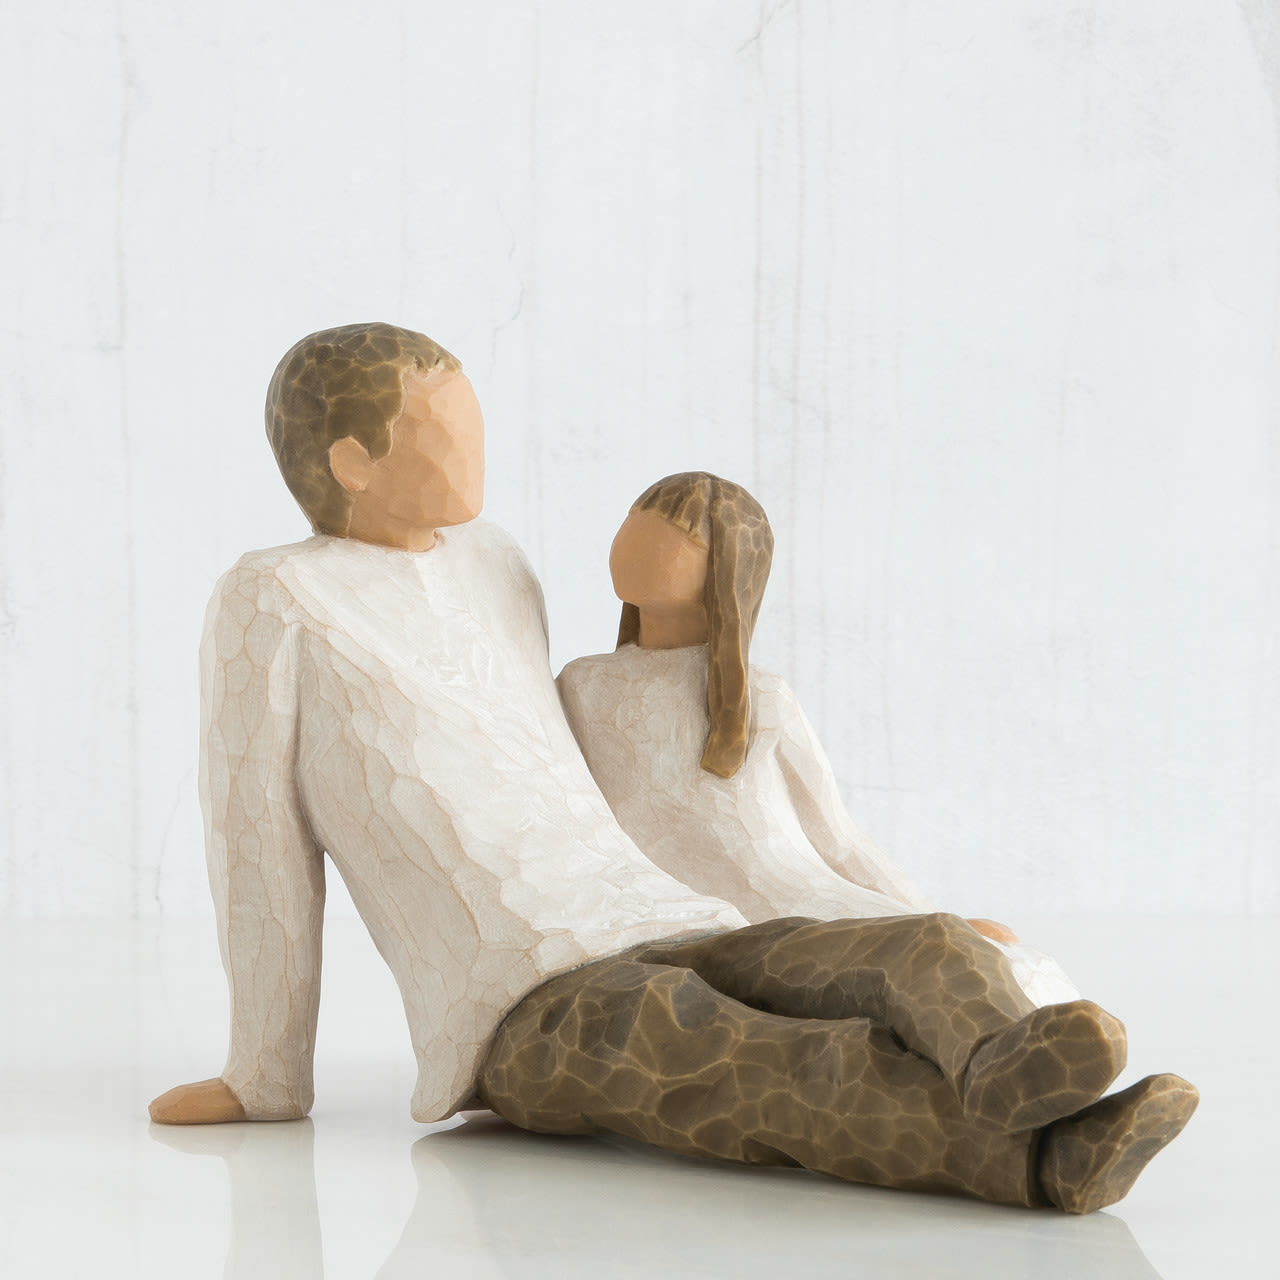 WILLOW TREE FATHER AND DAUGTHER - A gift to celebrate the loving relationships that develop between parent and child.